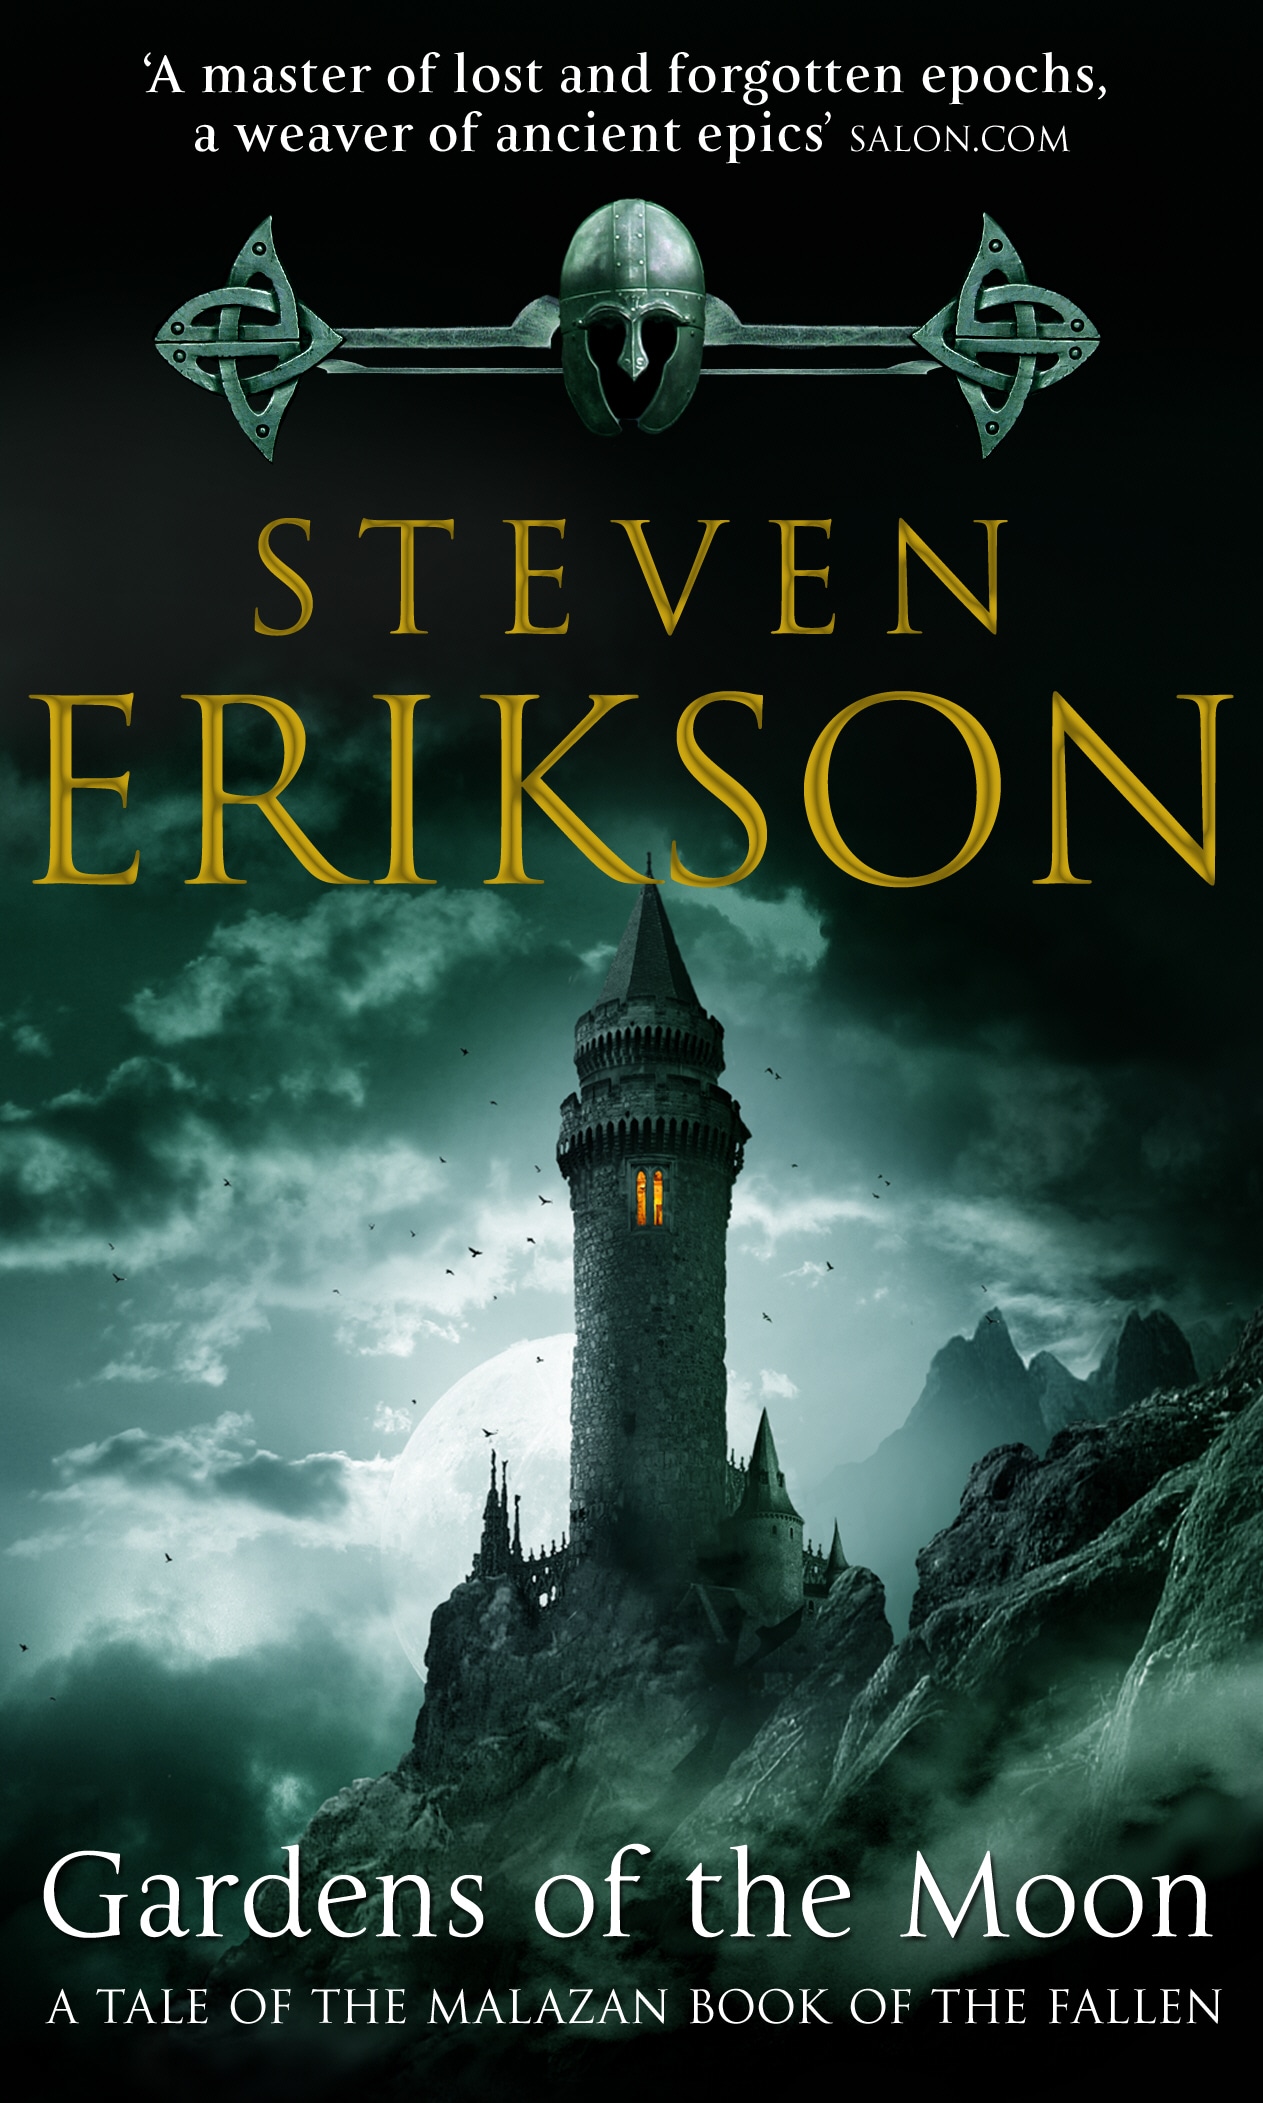 Book “Gardens Of The Moon” by Steven Erikson — February 12, 2008